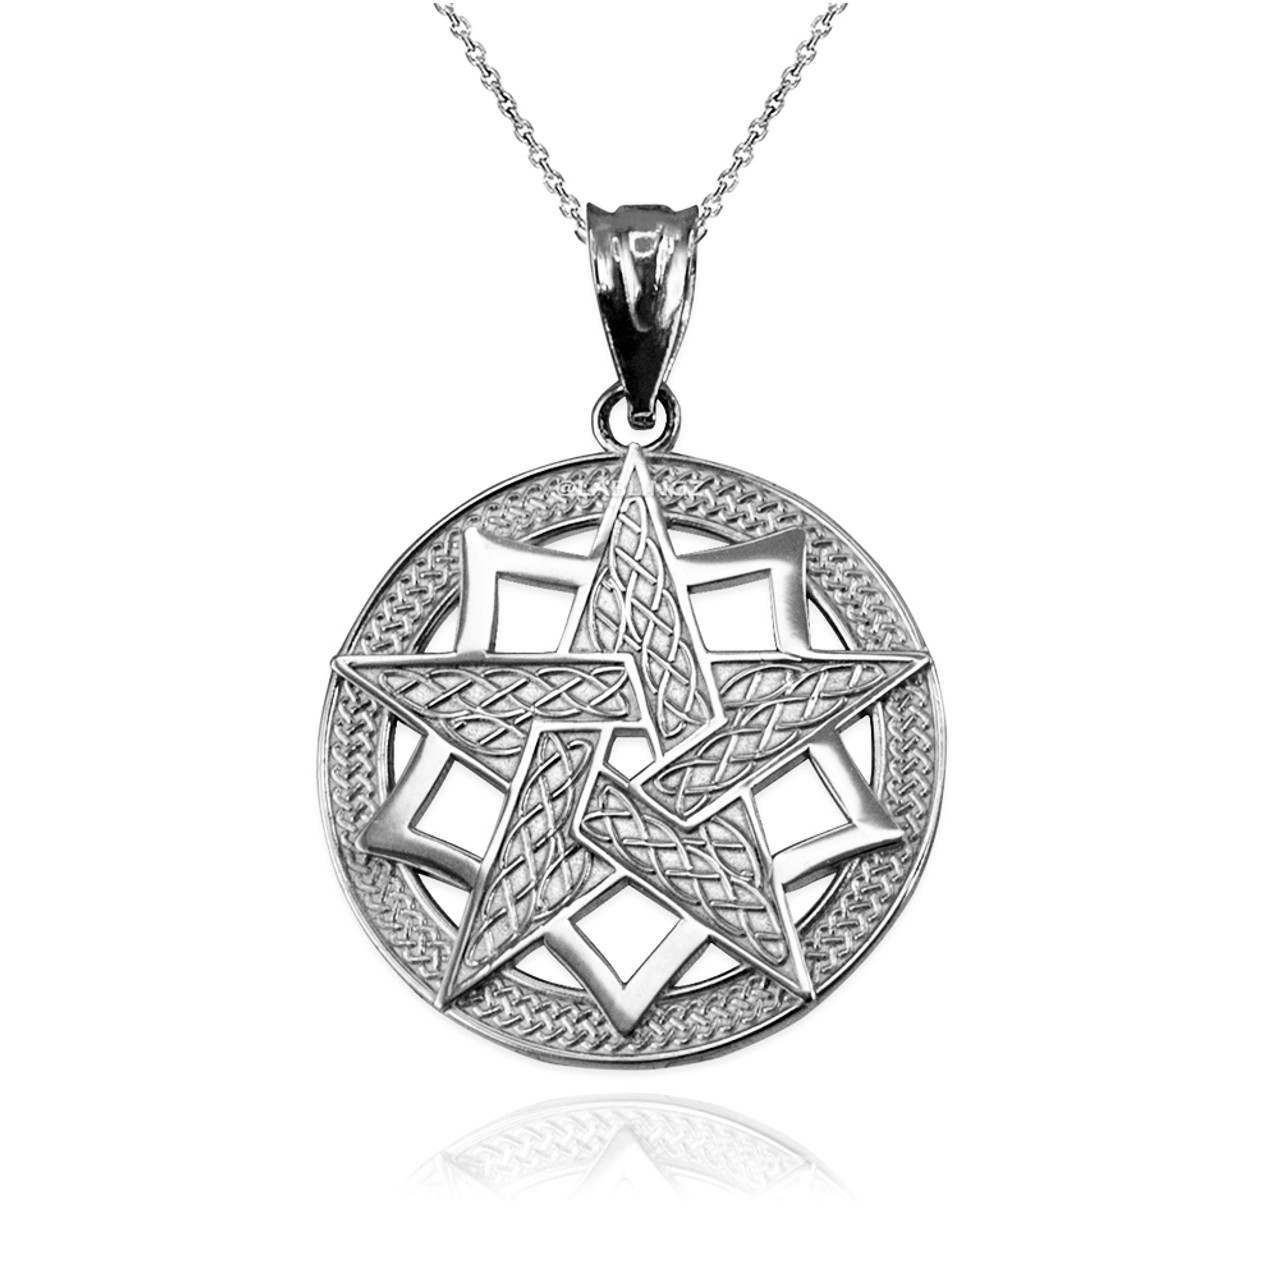 Ladytree Sterling Silver 925 Pentagram Necklaces Seal of Solomon Pendant  with Wax Cord Black Rope, 28+2 inches | Amazon.com